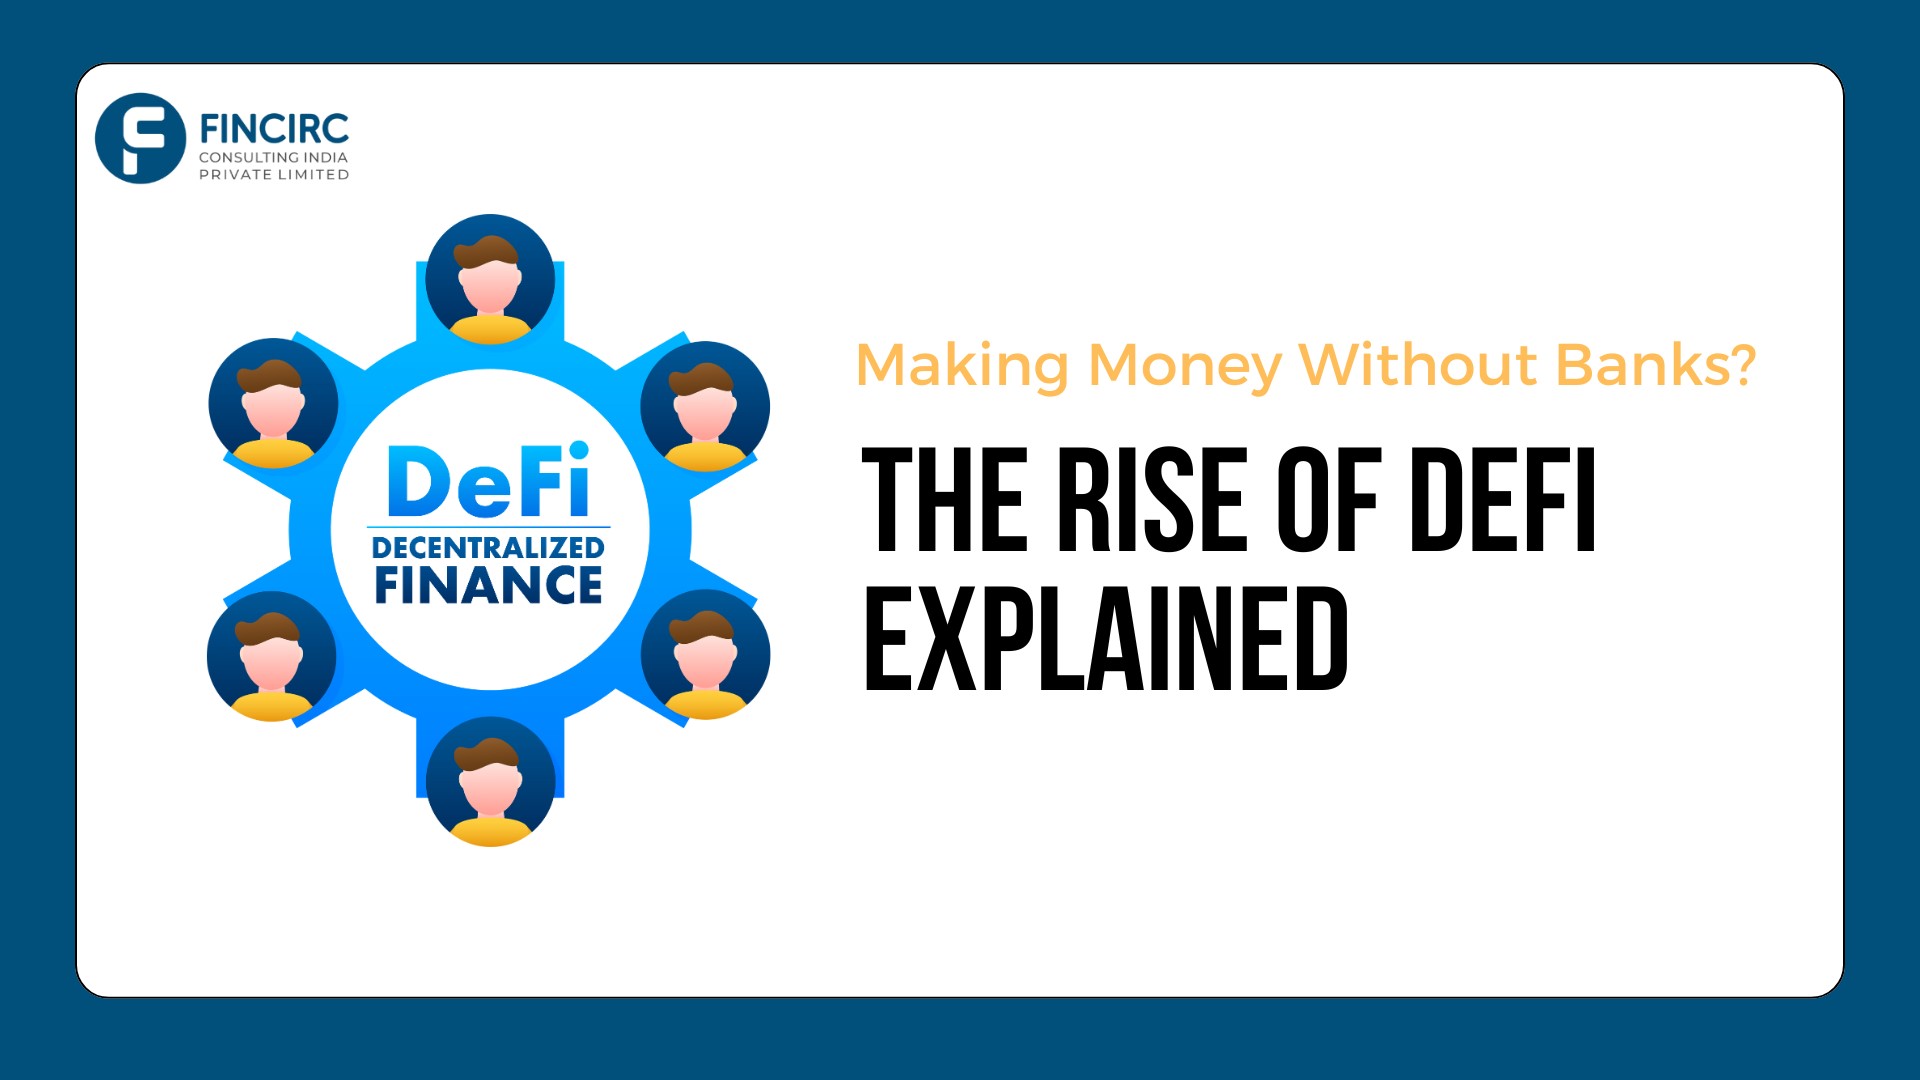 Making Money Without Banks? The Rise of DeFi Explained